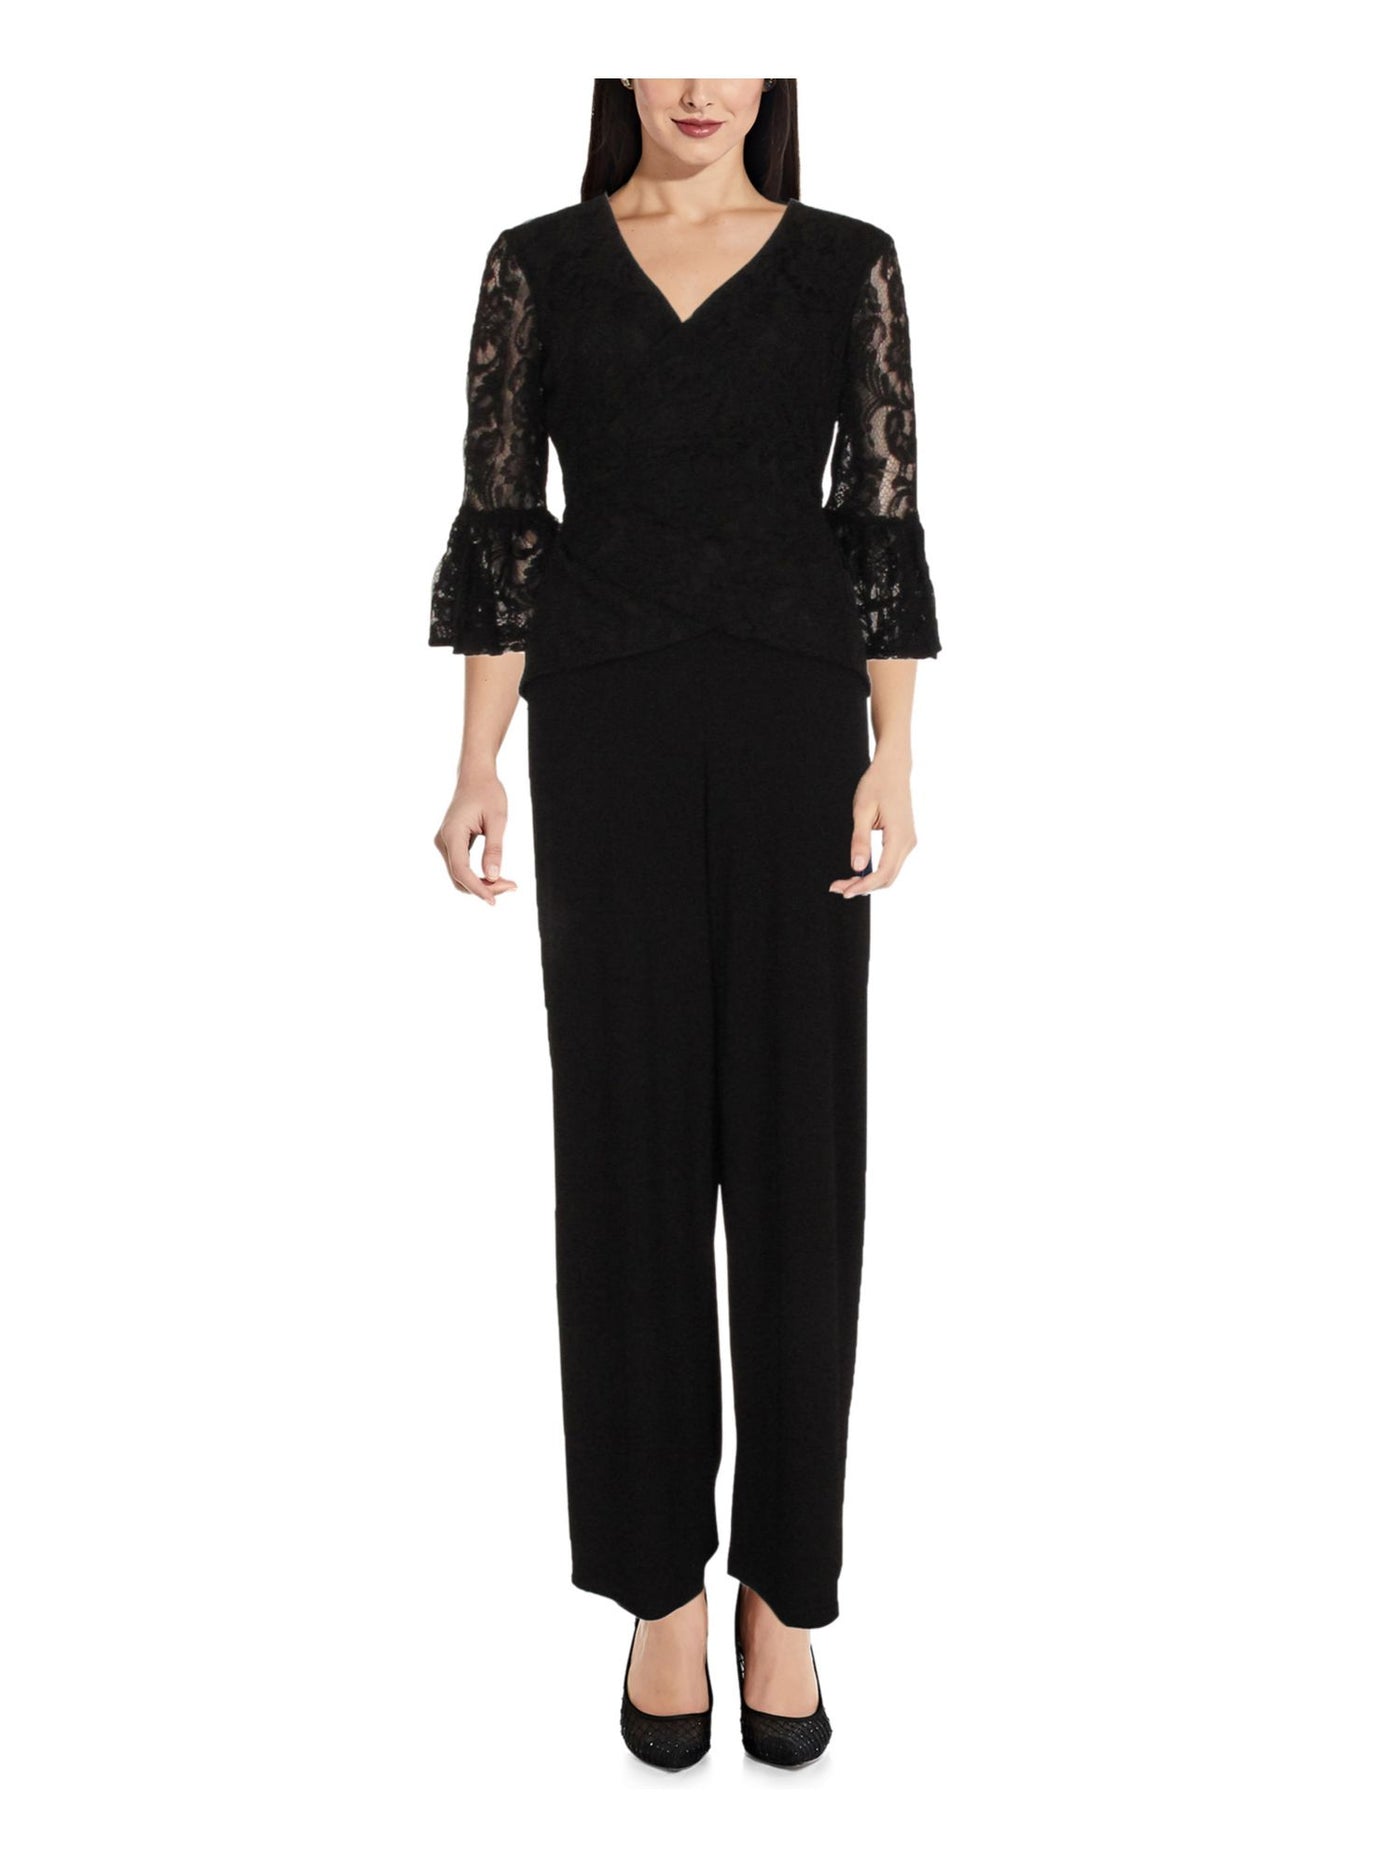 ADRIANNA PAPELL Womens Black Jersey Lace 3/4 Sleeve Evening Straight leg Jumpsuit 6